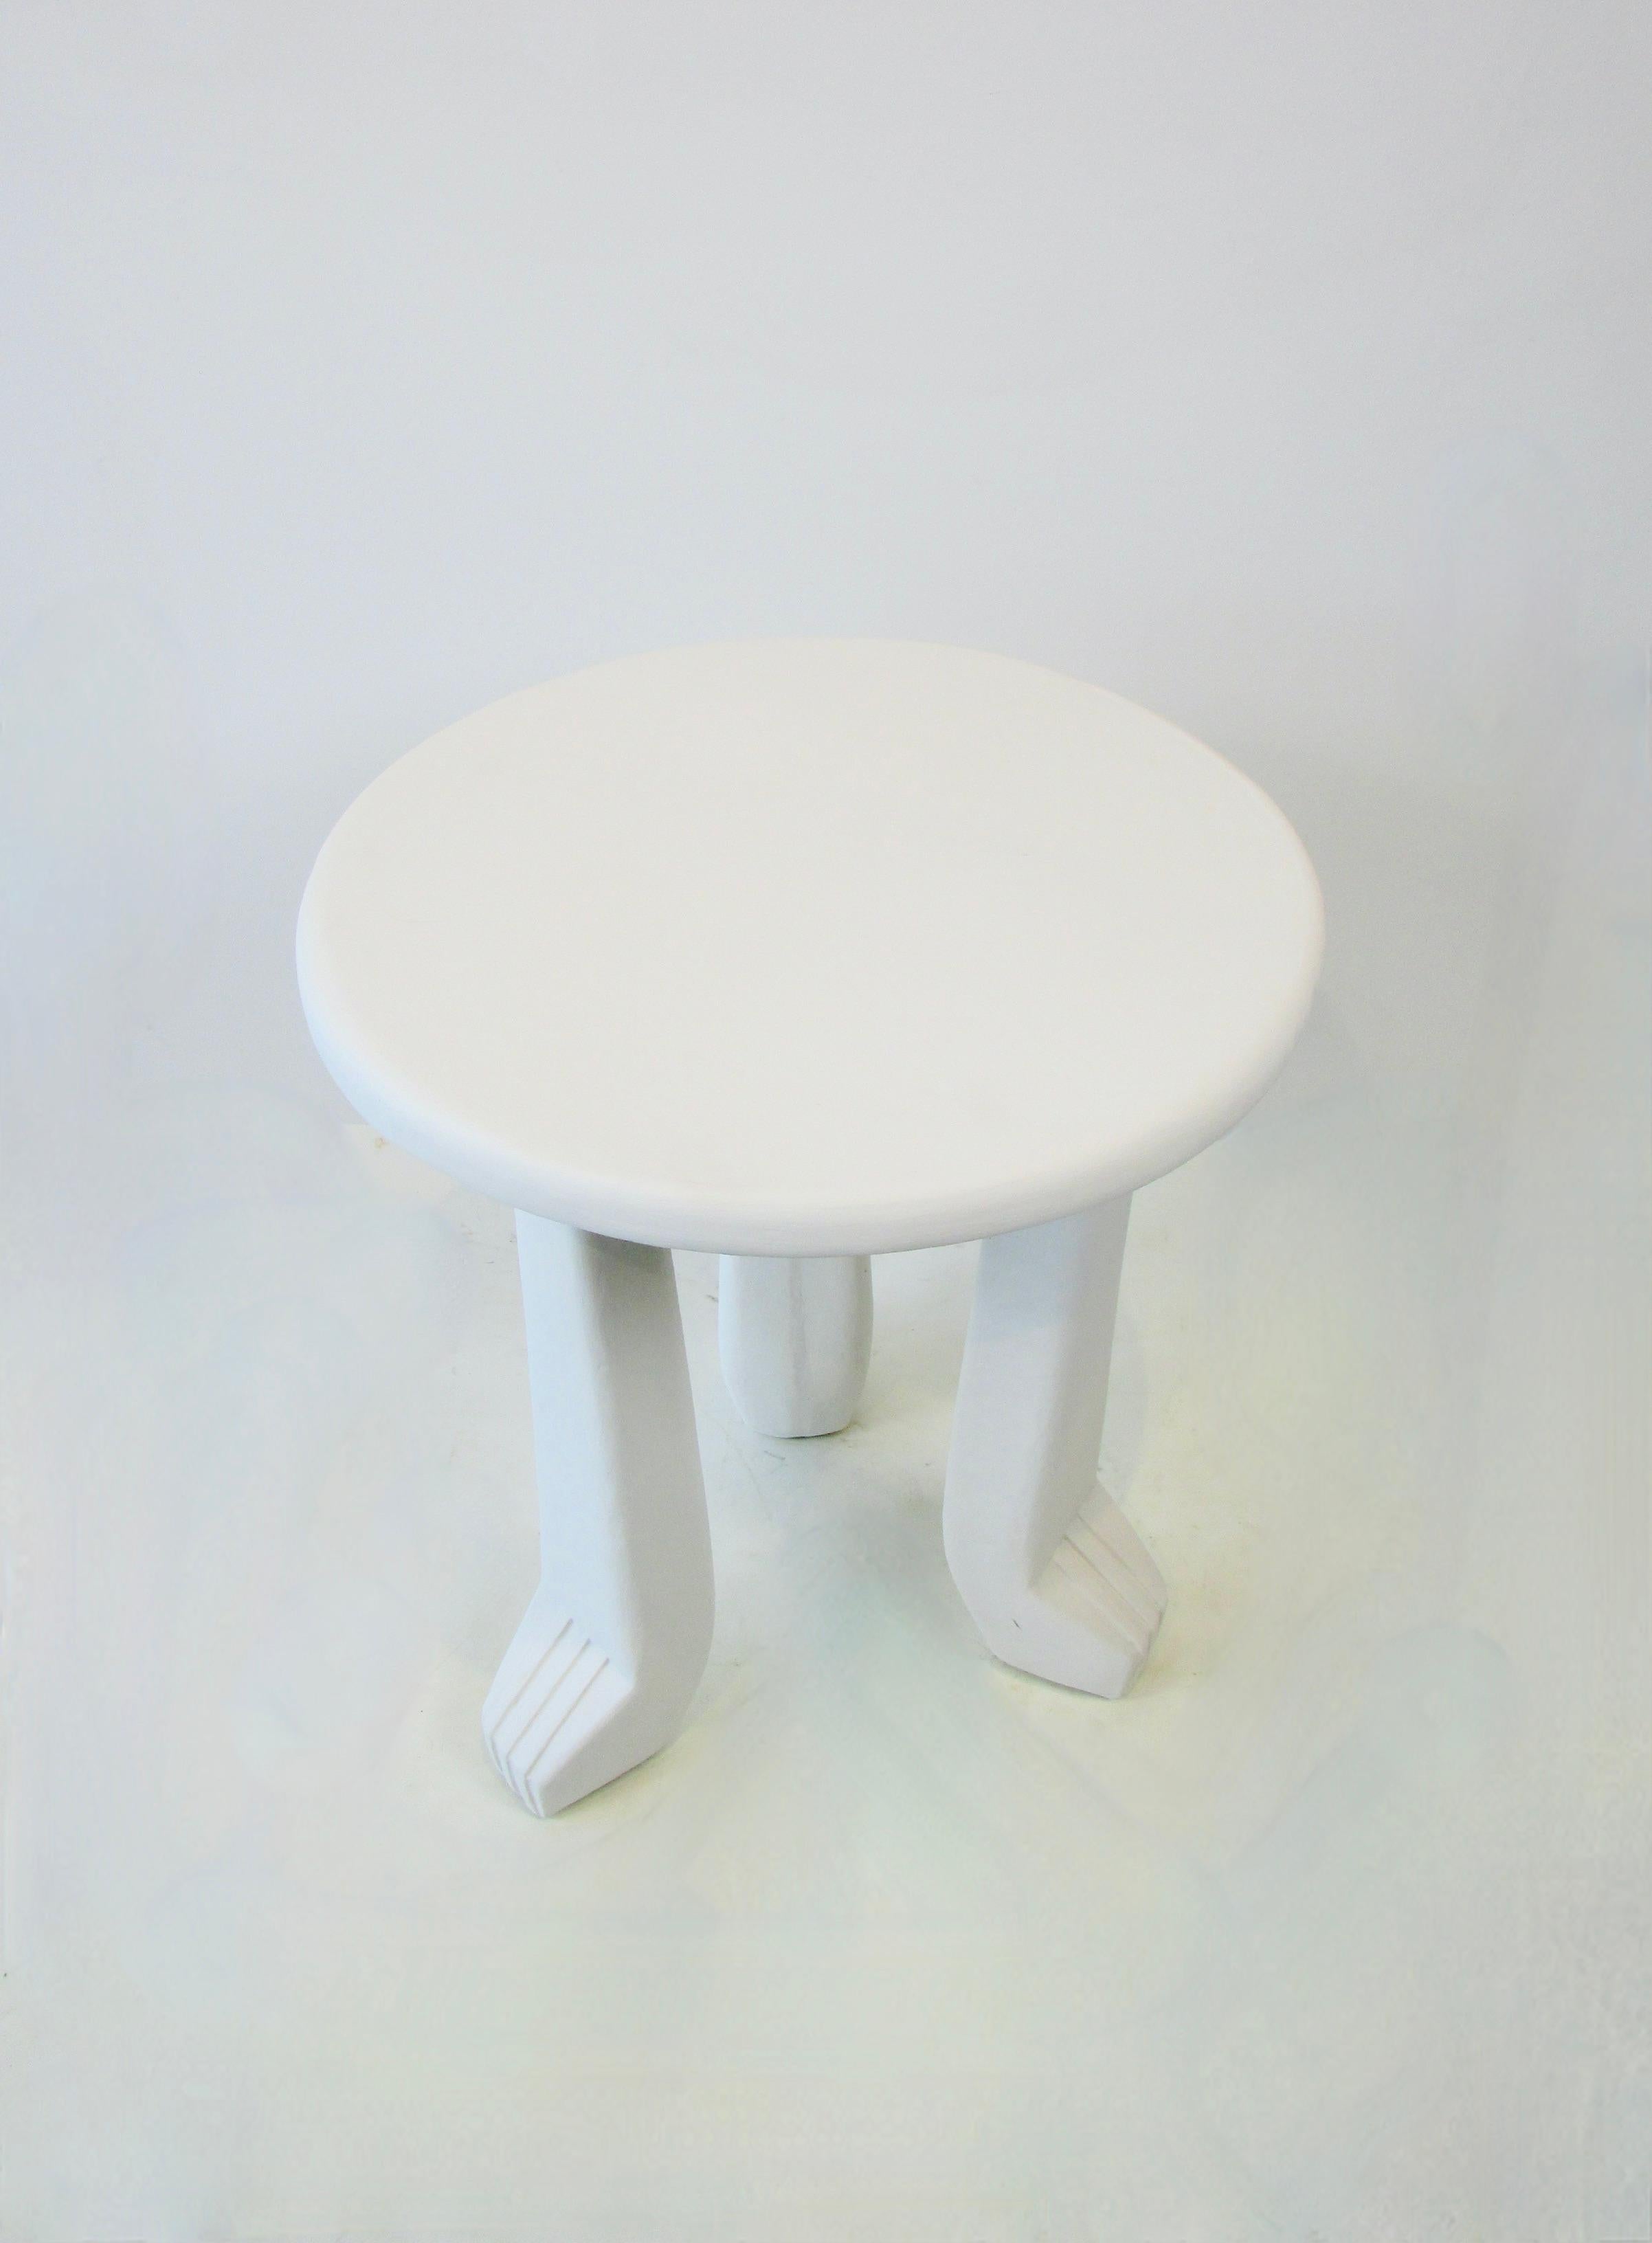 Painted plaster African table attributed to John Dickinson For Sale 1